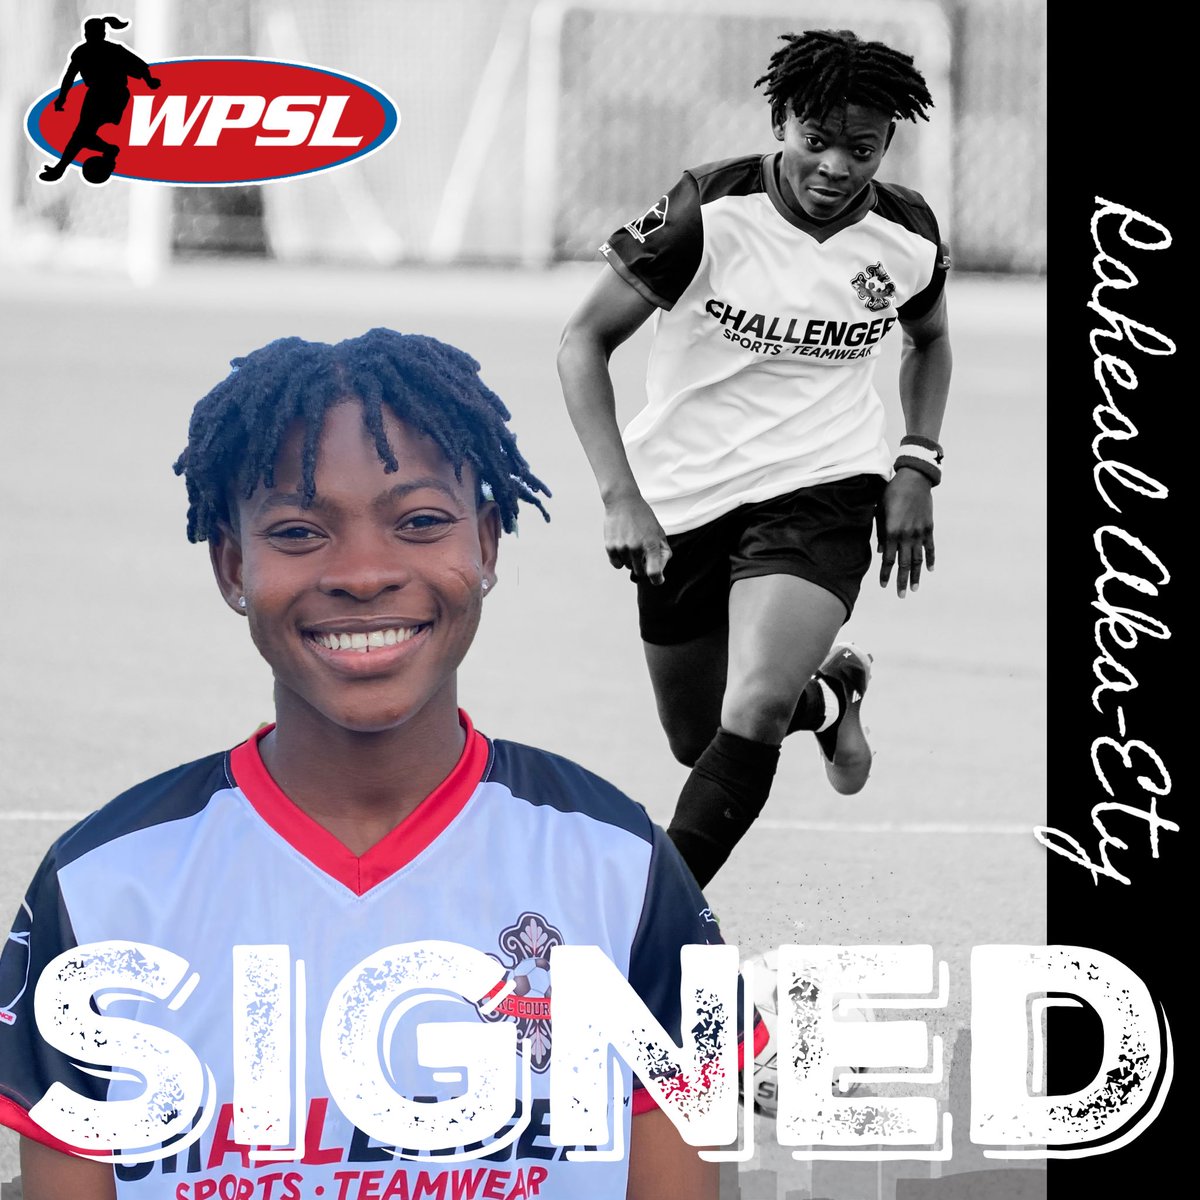 🚨PLAYER ANNOUNCEMENT🚨

We’re excited to announce that Raheal Aka-Ety will join us again this summer. Raheal is a grad student at MVSU. She earned All-SWAC 1st team honors last fall and was an Ida Sports WPSL National Player of the Week last season. Welcome back, Raheal!❤️⚽️🖤